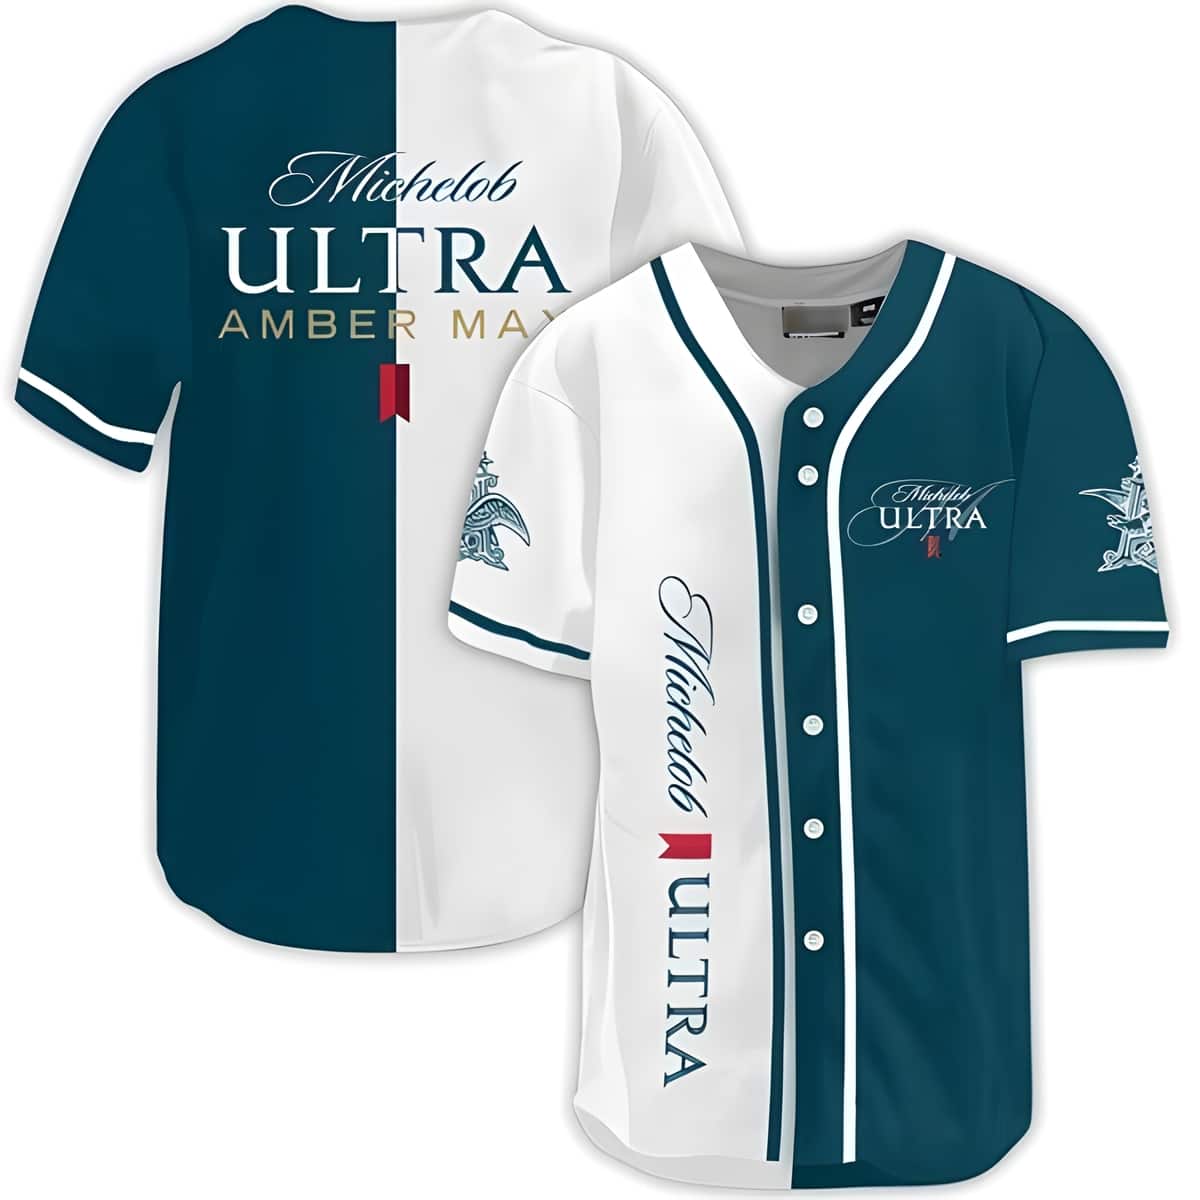 Amber Max Michelob ULTRA Baseball Jersey Best Gift For Beer Lovers